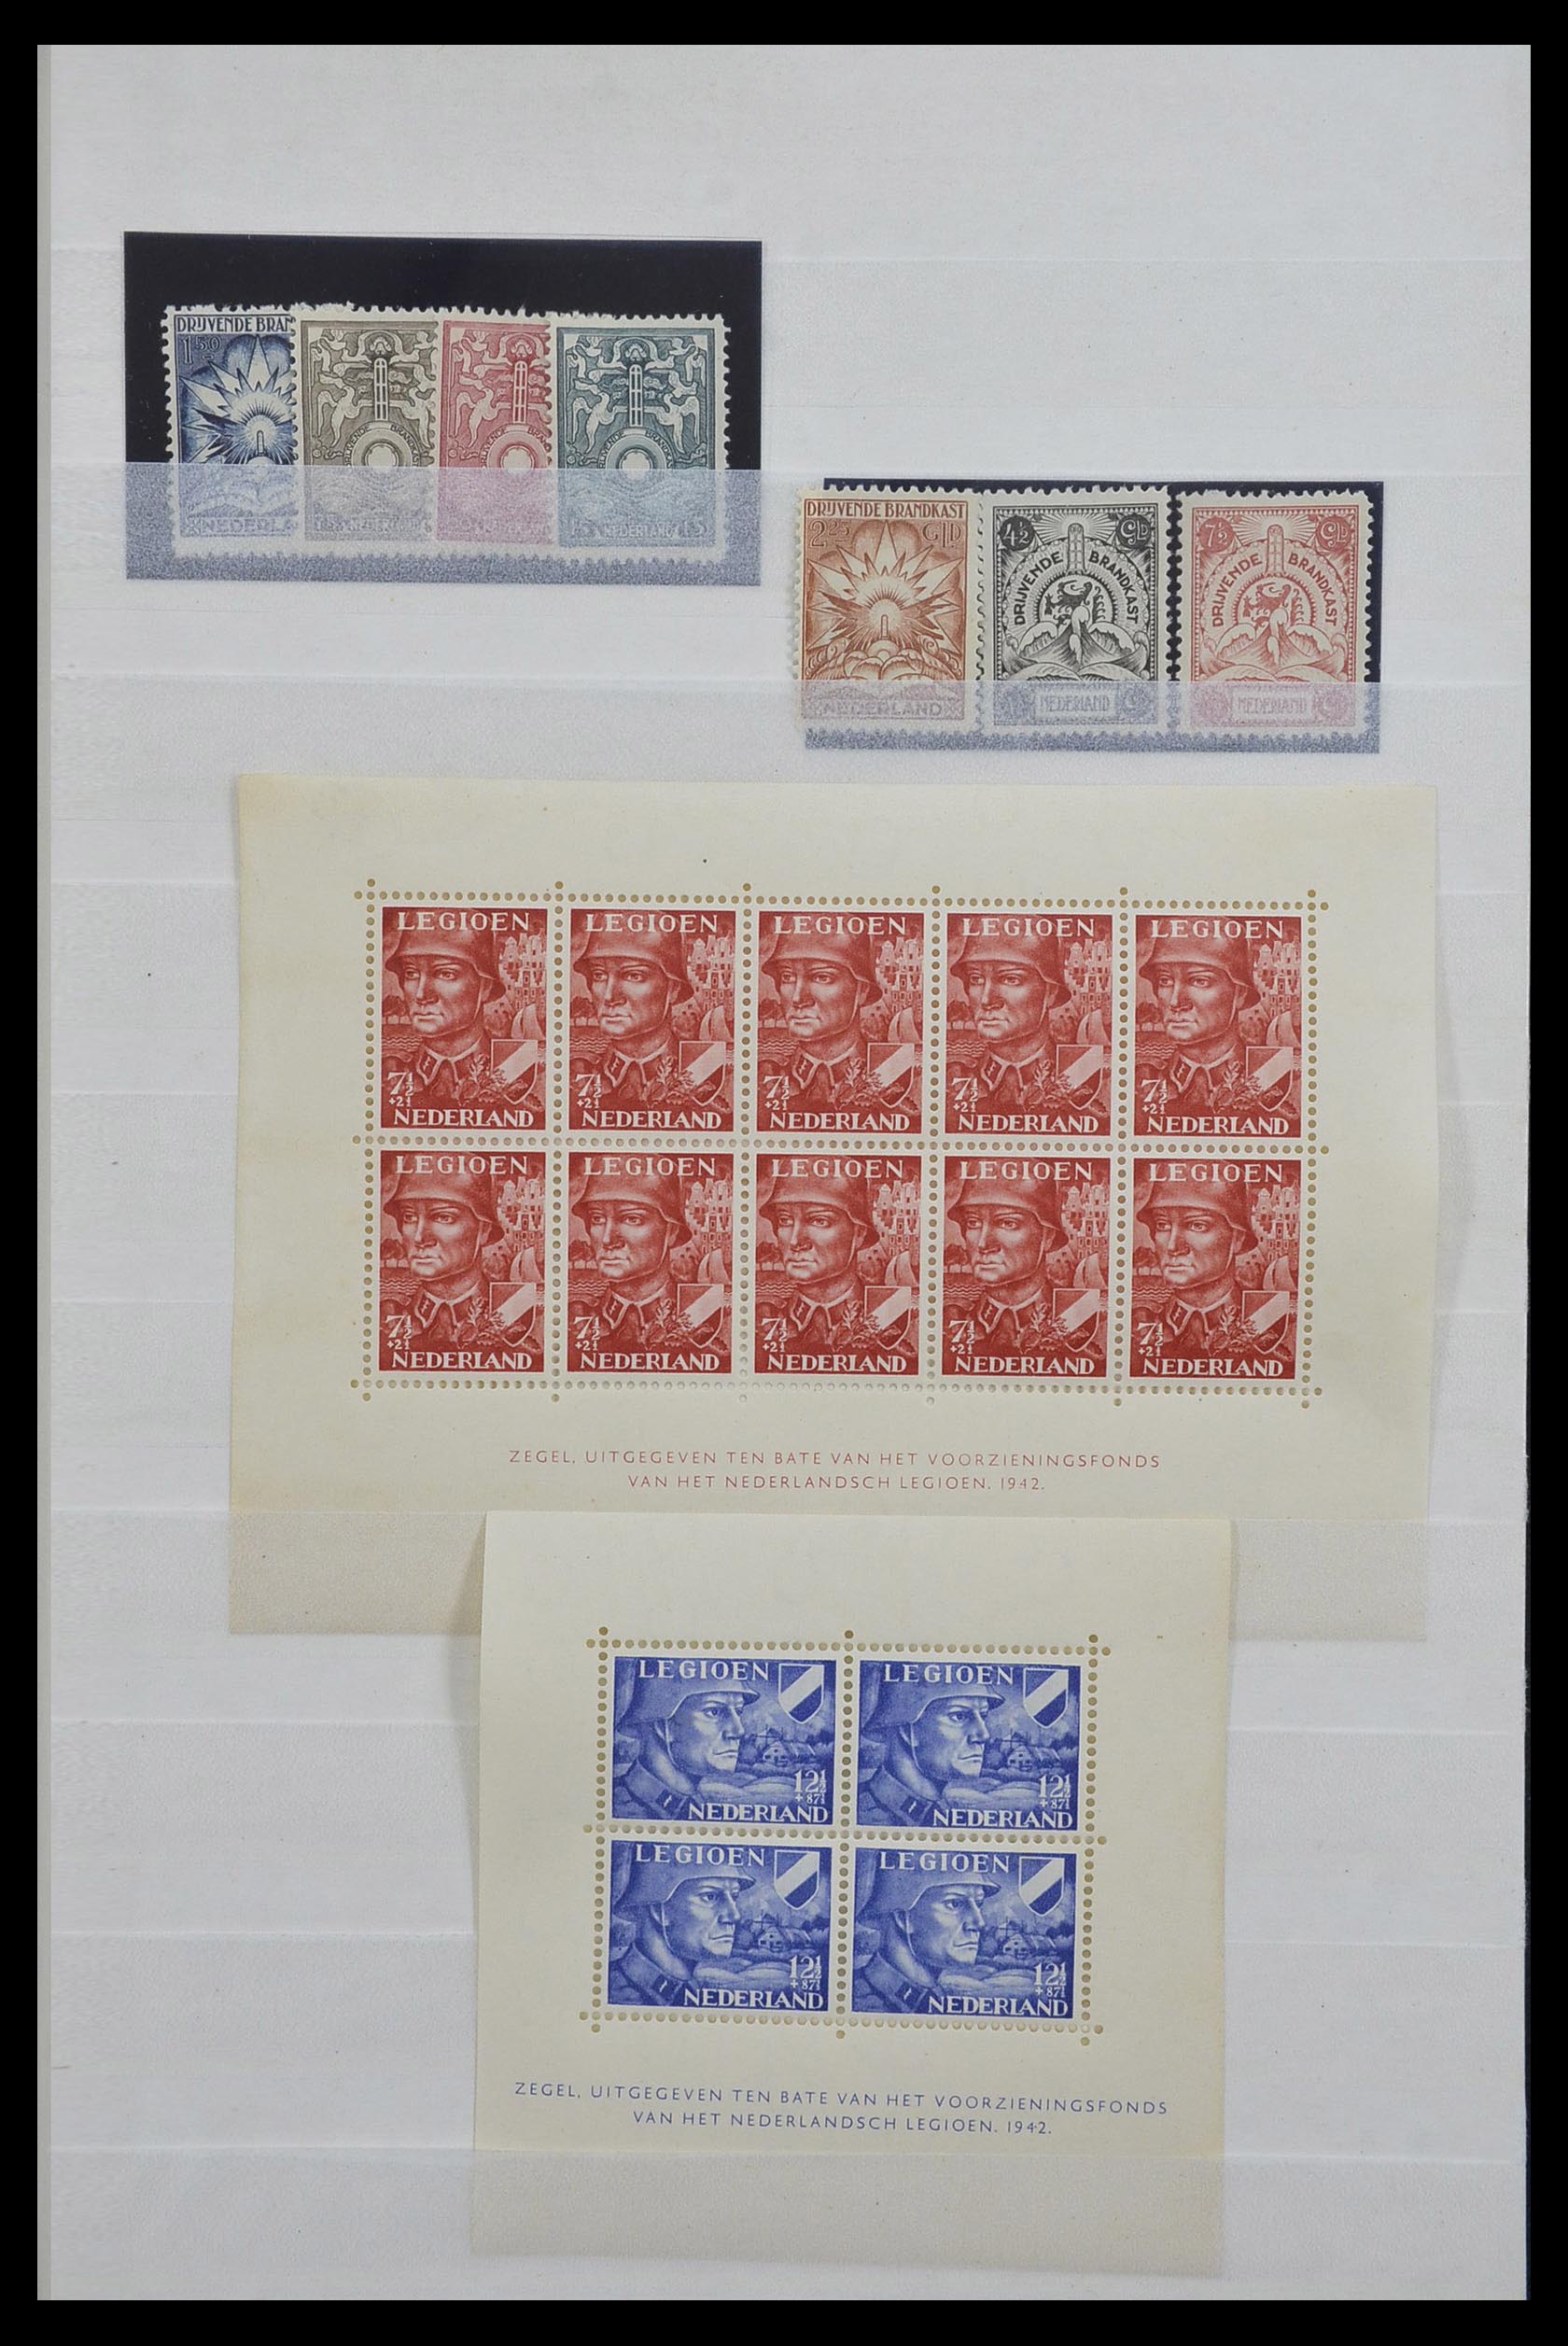 33607 001 - Stamp collection 33607 Netherlands key stamps 1852-1942.